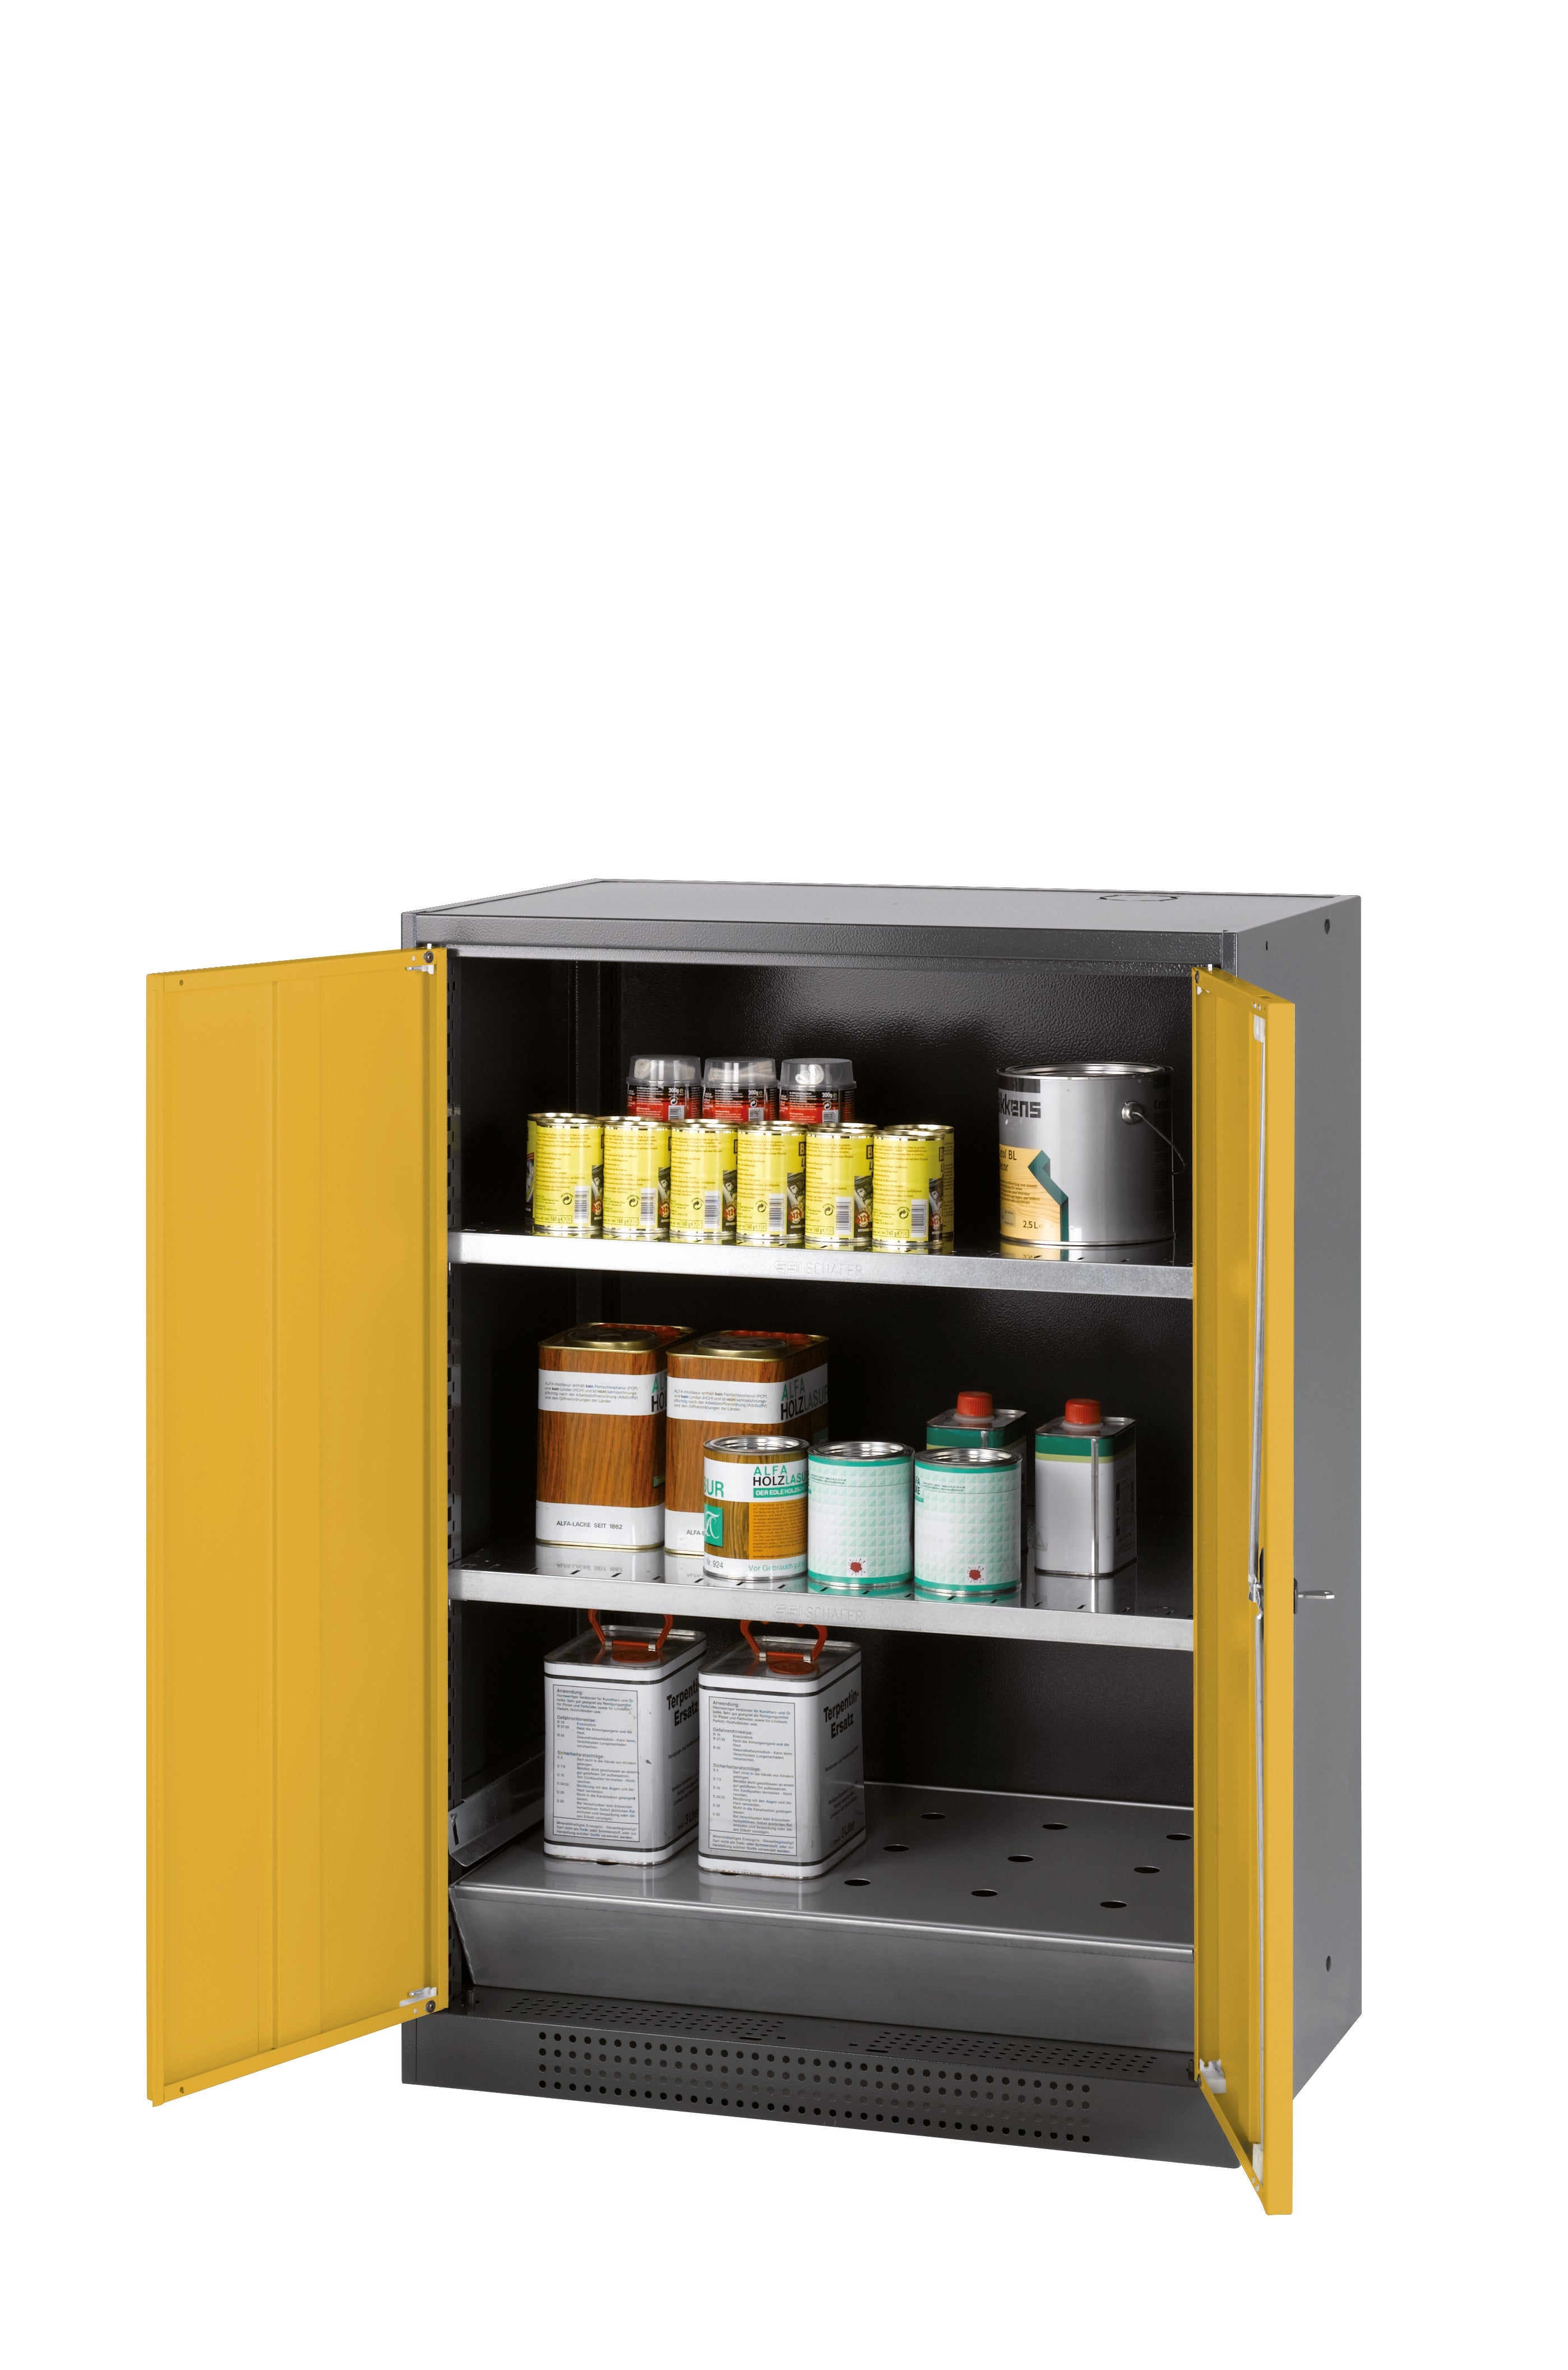 Chemical cabinet CS-CLASSIC model CS.110.081 in safety yellow RAL 1004 with 2x standard shelves (sheet steel)